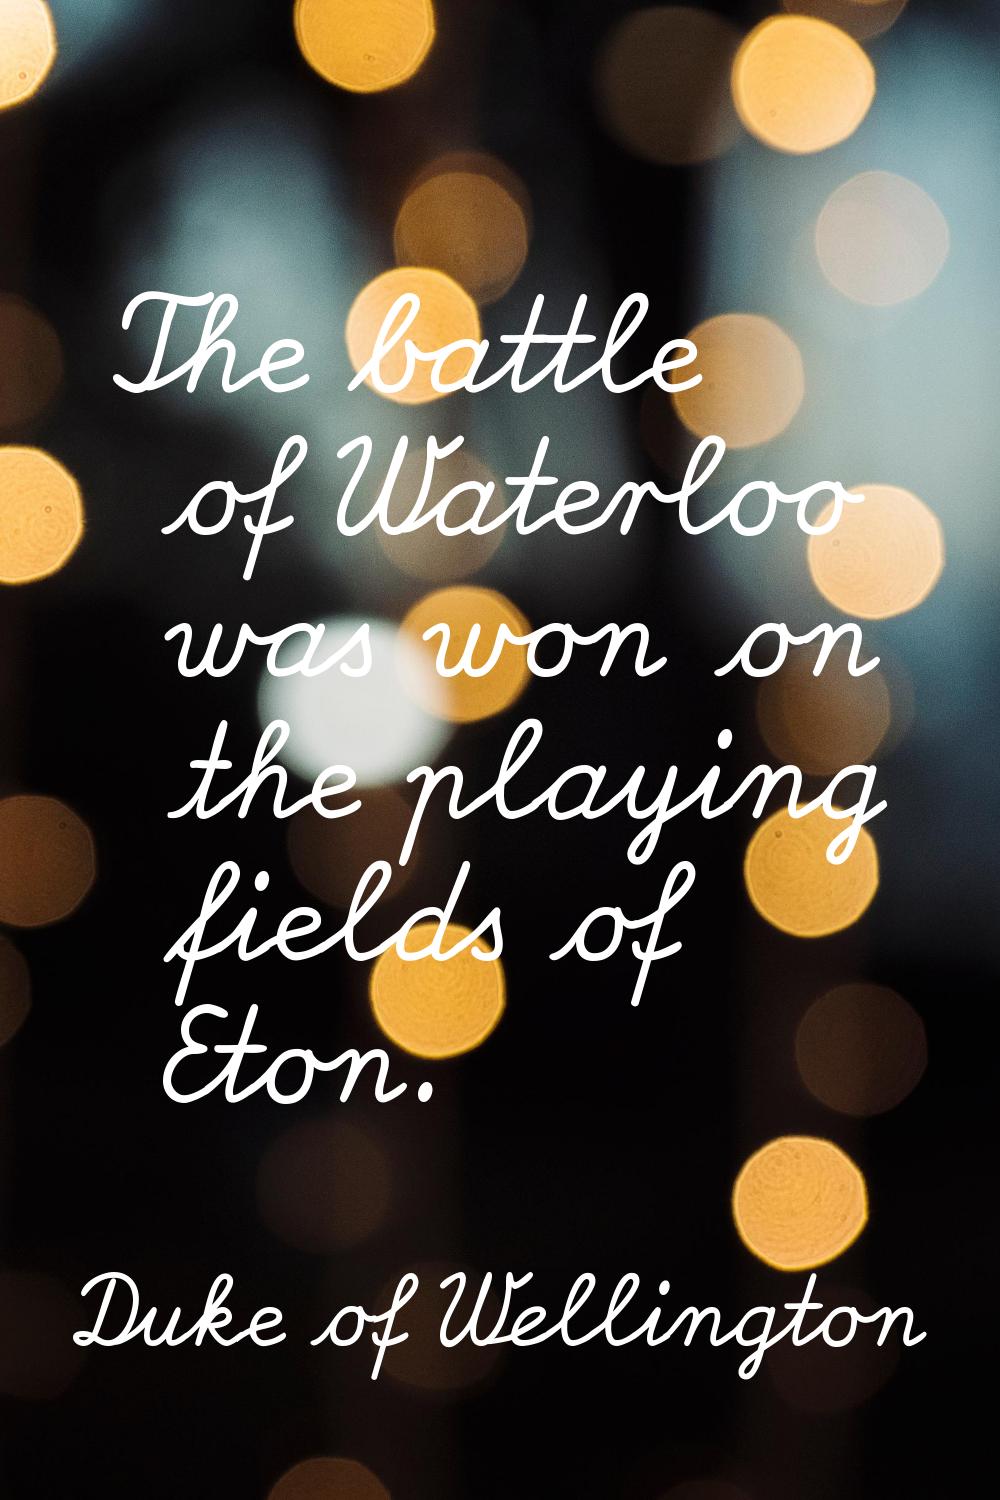 The battle of Waterloo was won on the playing fields of Eton.